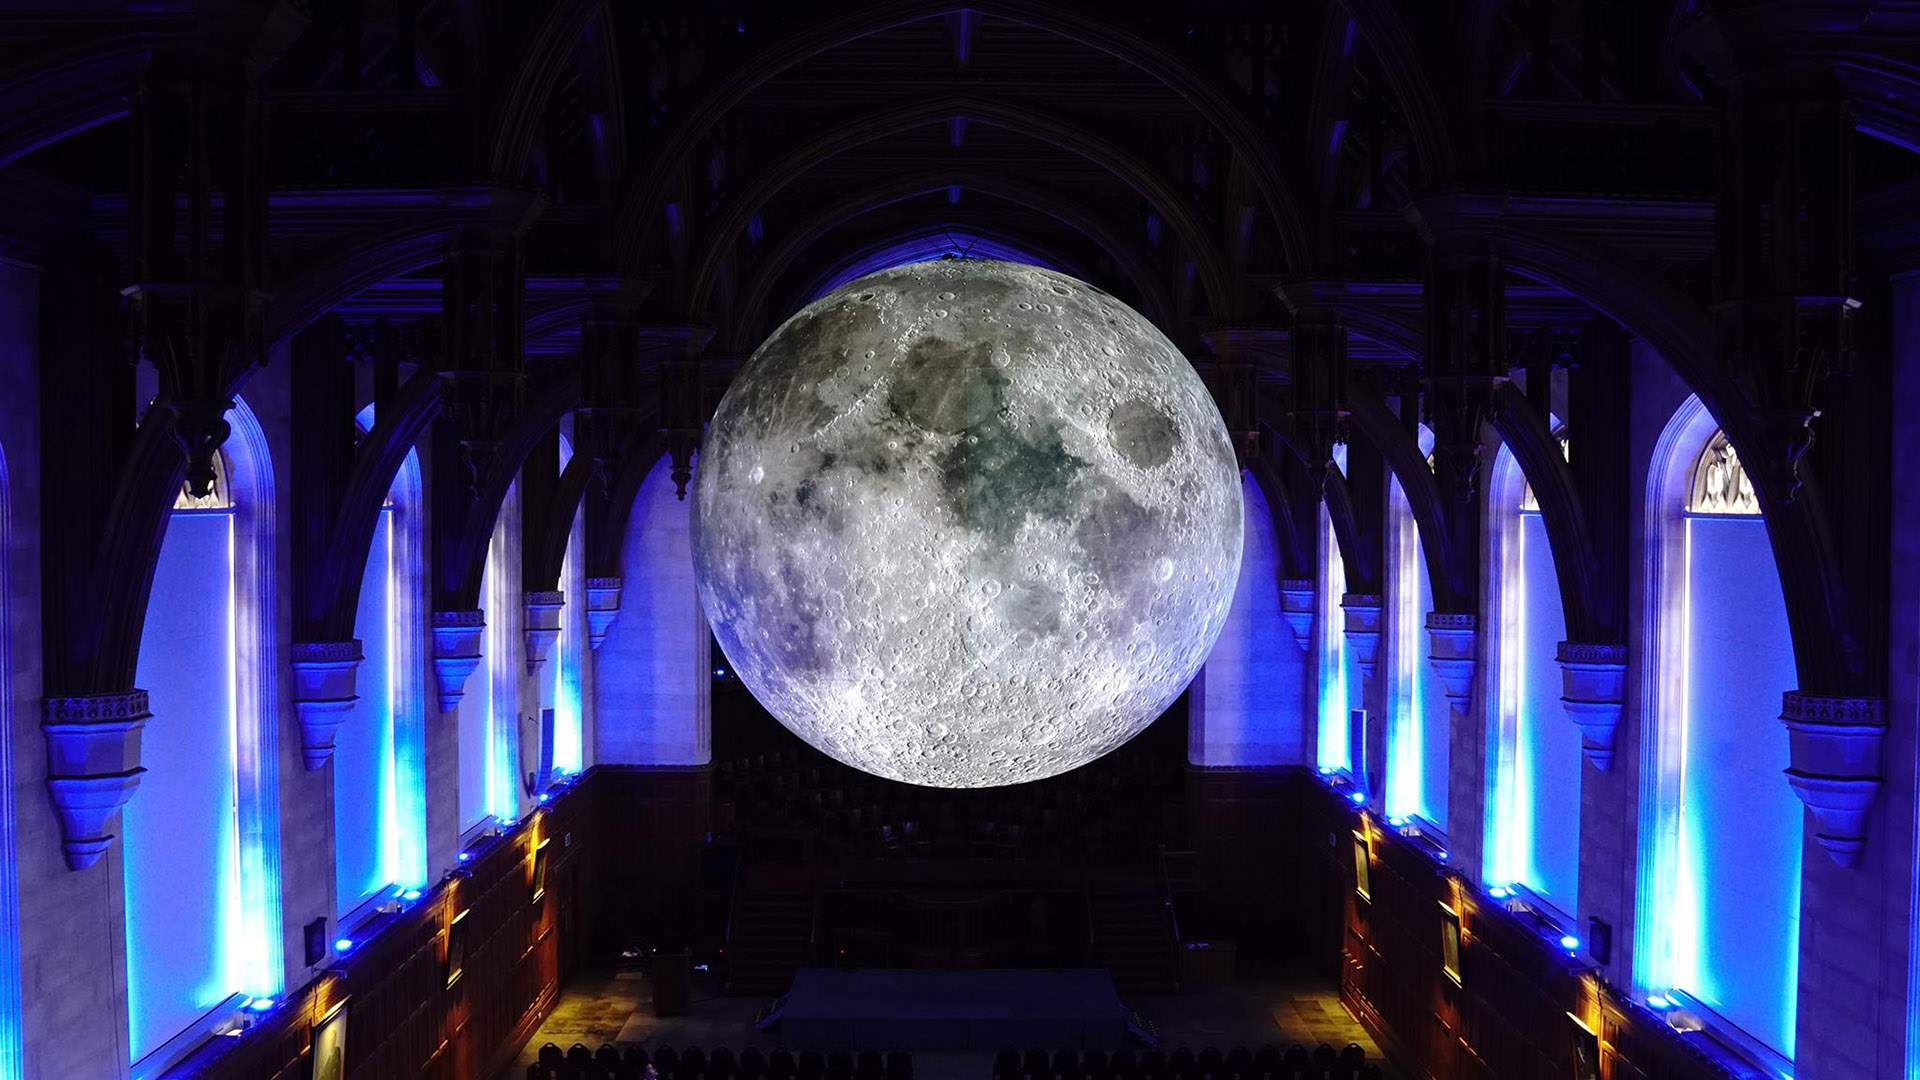 A Giant Floating Sculpture of the Moon Is Coming to Australia